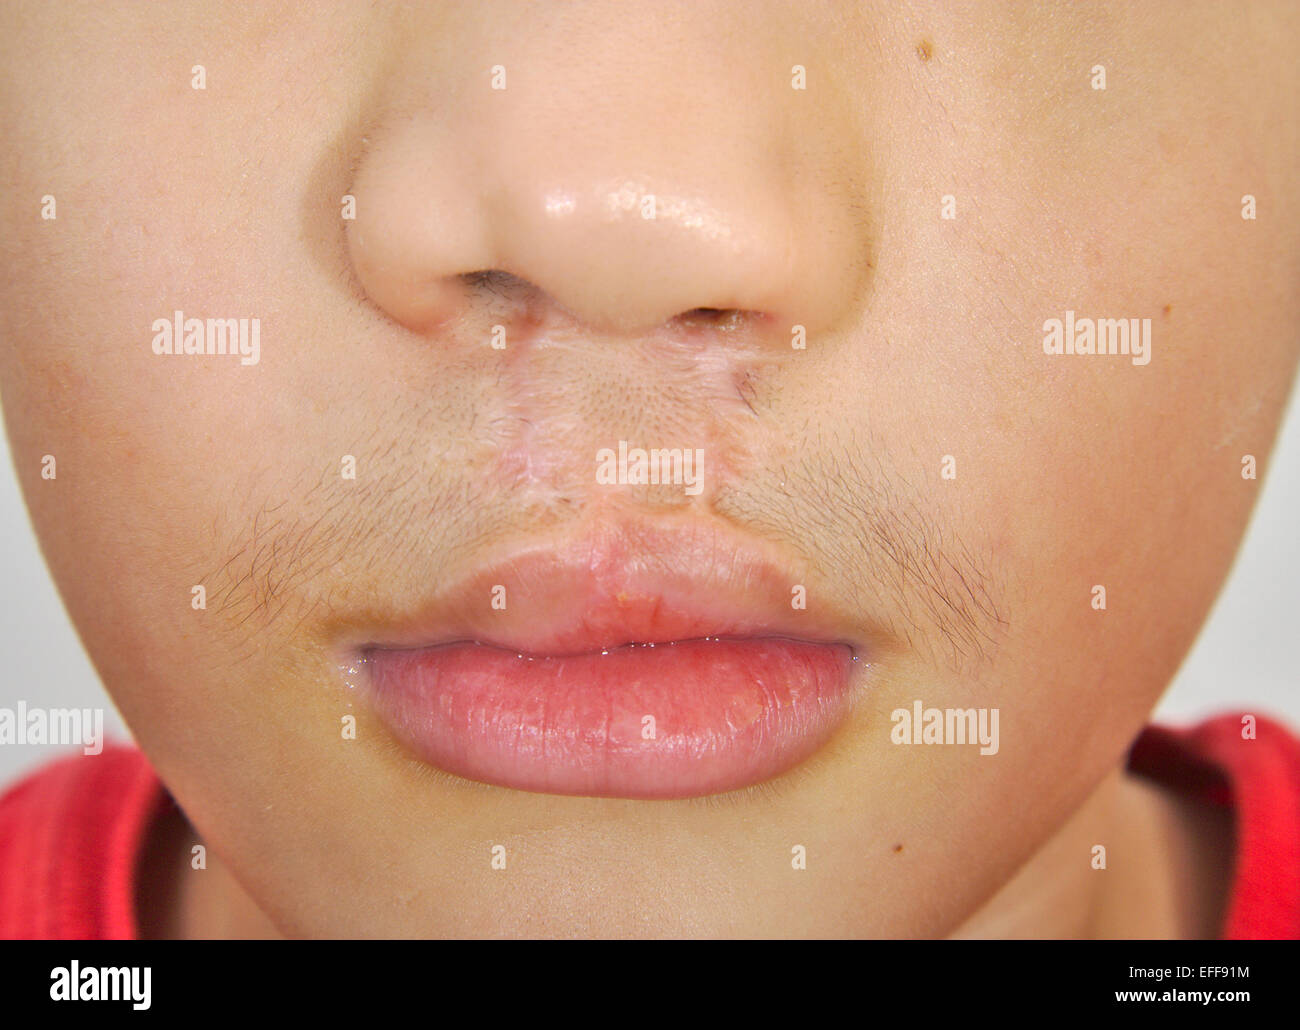 Boy showing a bilateral cleft lip repaired Stock Photo